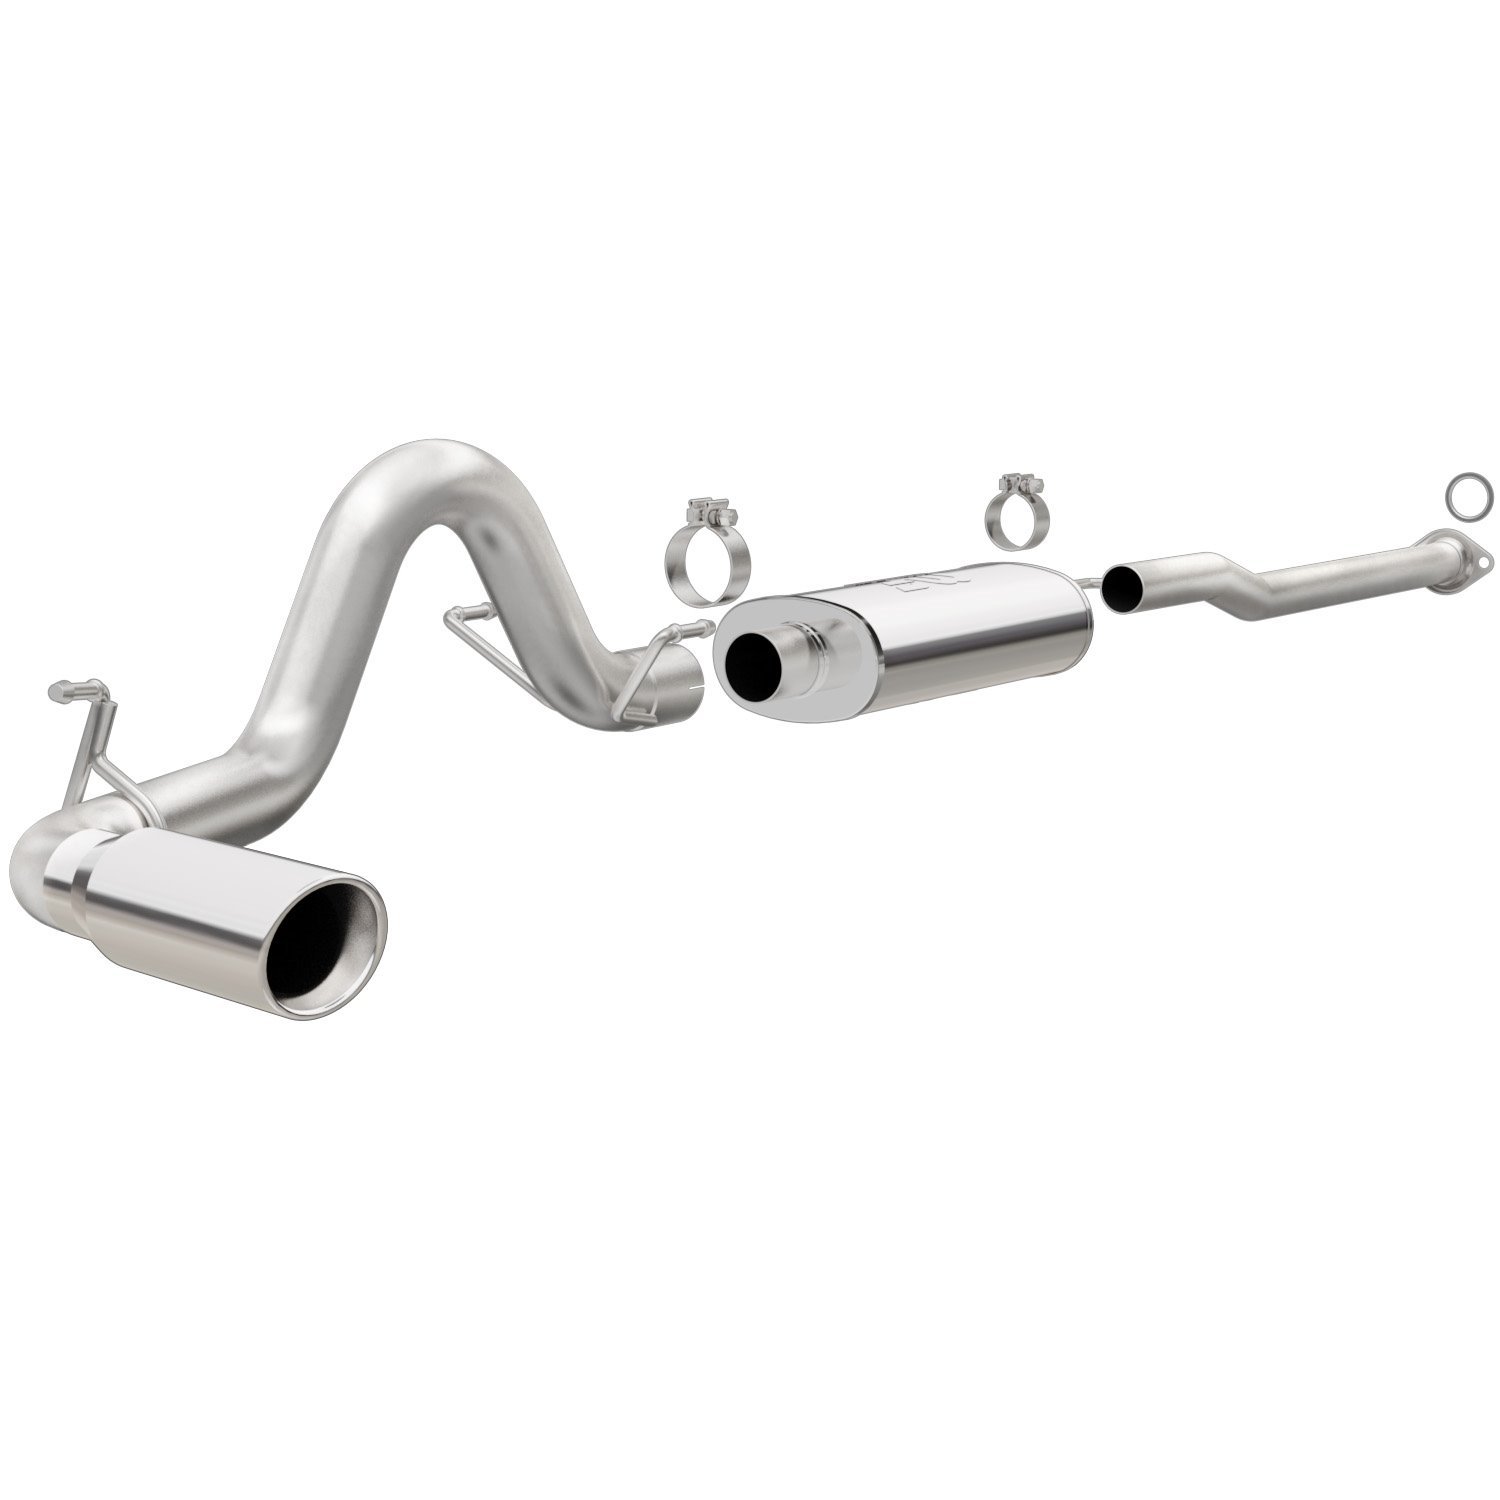 MF Series Cat-Back Exhaust System 2013-15 Toyota Tacoma 4.0L V6